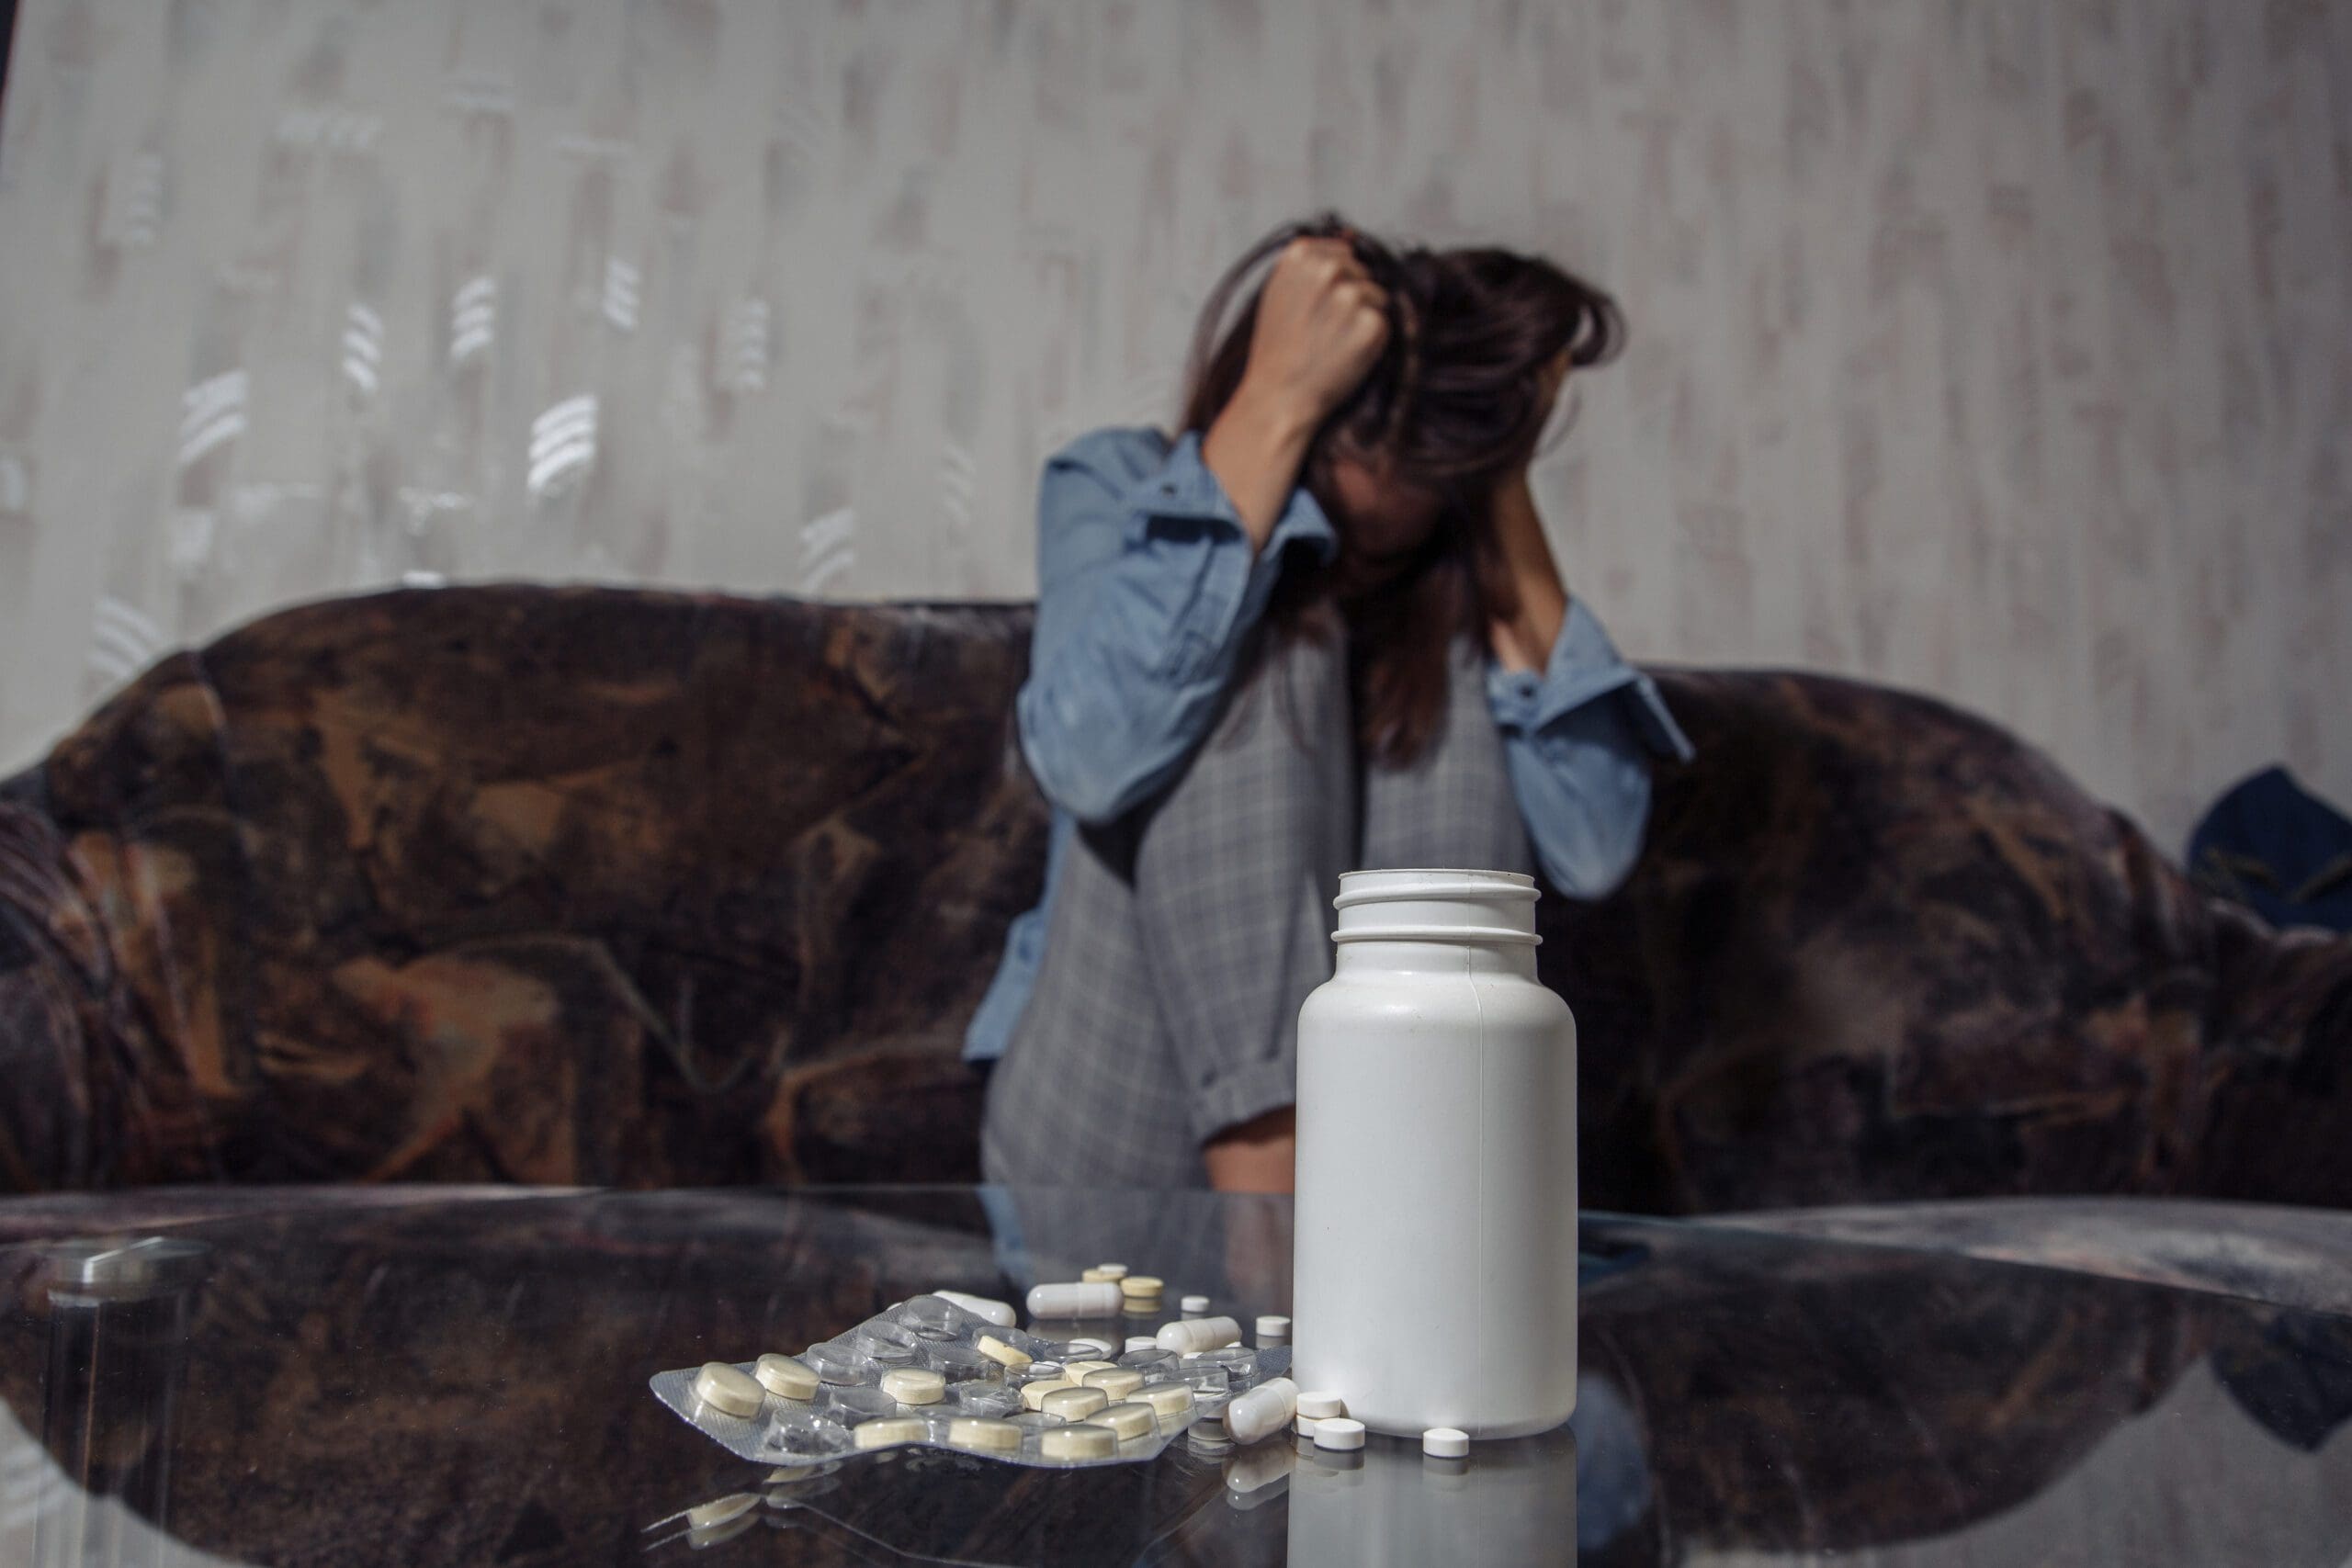 A distressed person sitting behind a table with a spilled bottle of pills in the foreground.